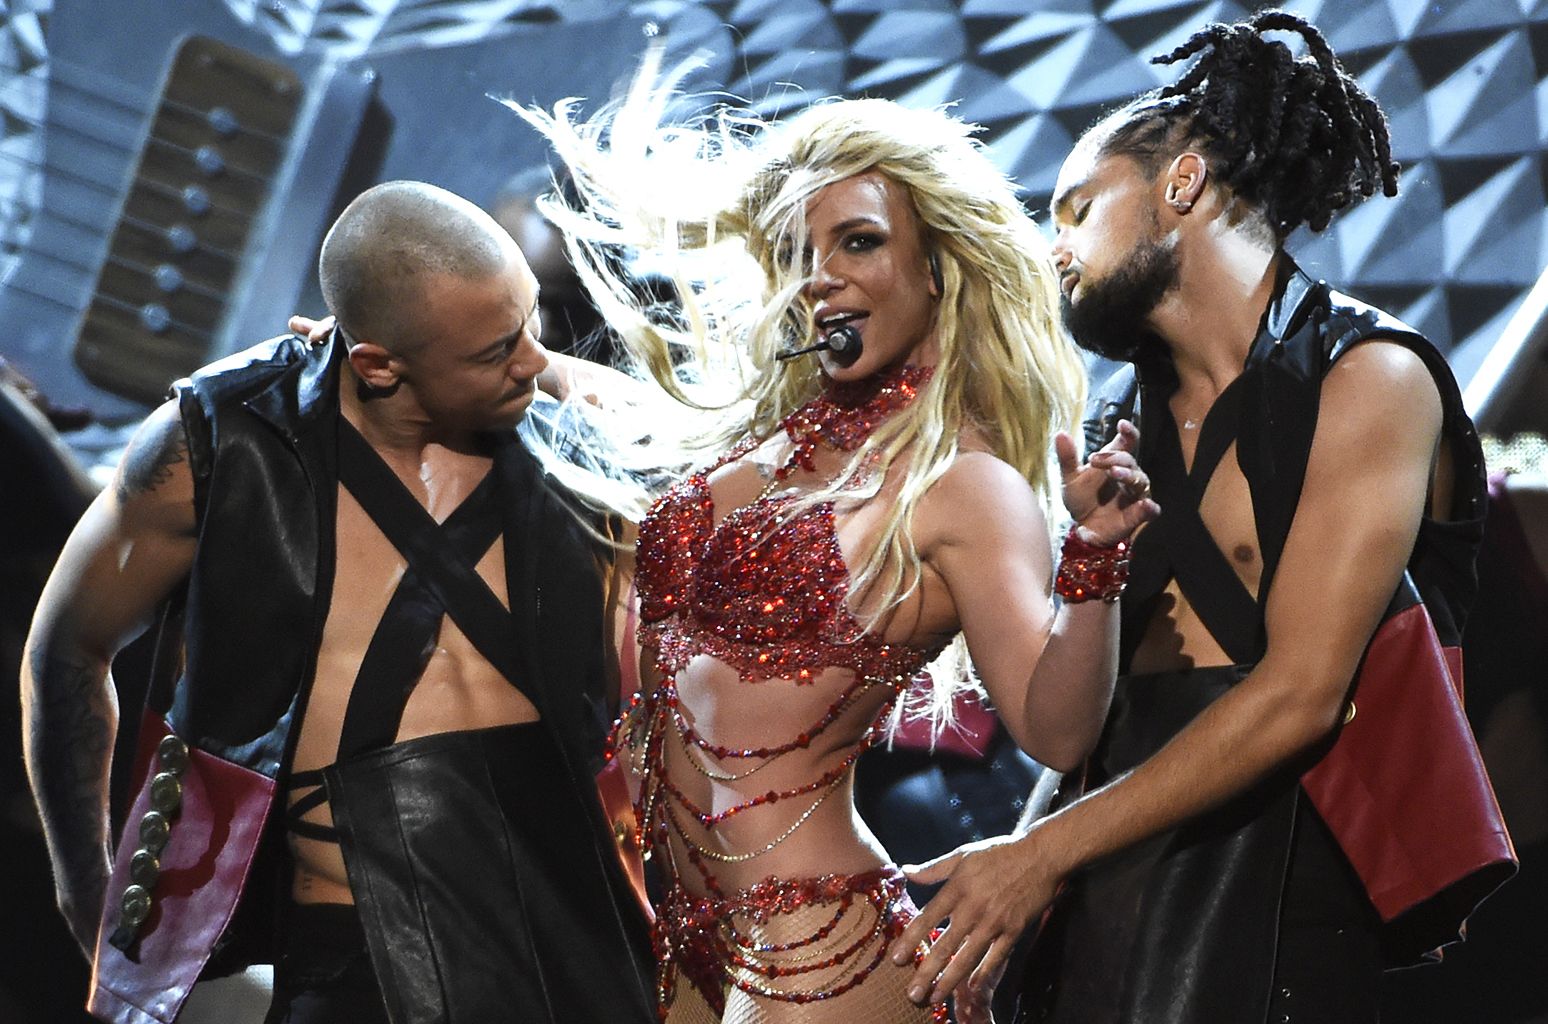 Britney Spears performs at the Billboard Music Awards at the T-Mobile Arena on Sunday, May 22, 2016, in Las Vegas. (Photo by Chris Pizzello/Invision/AP)